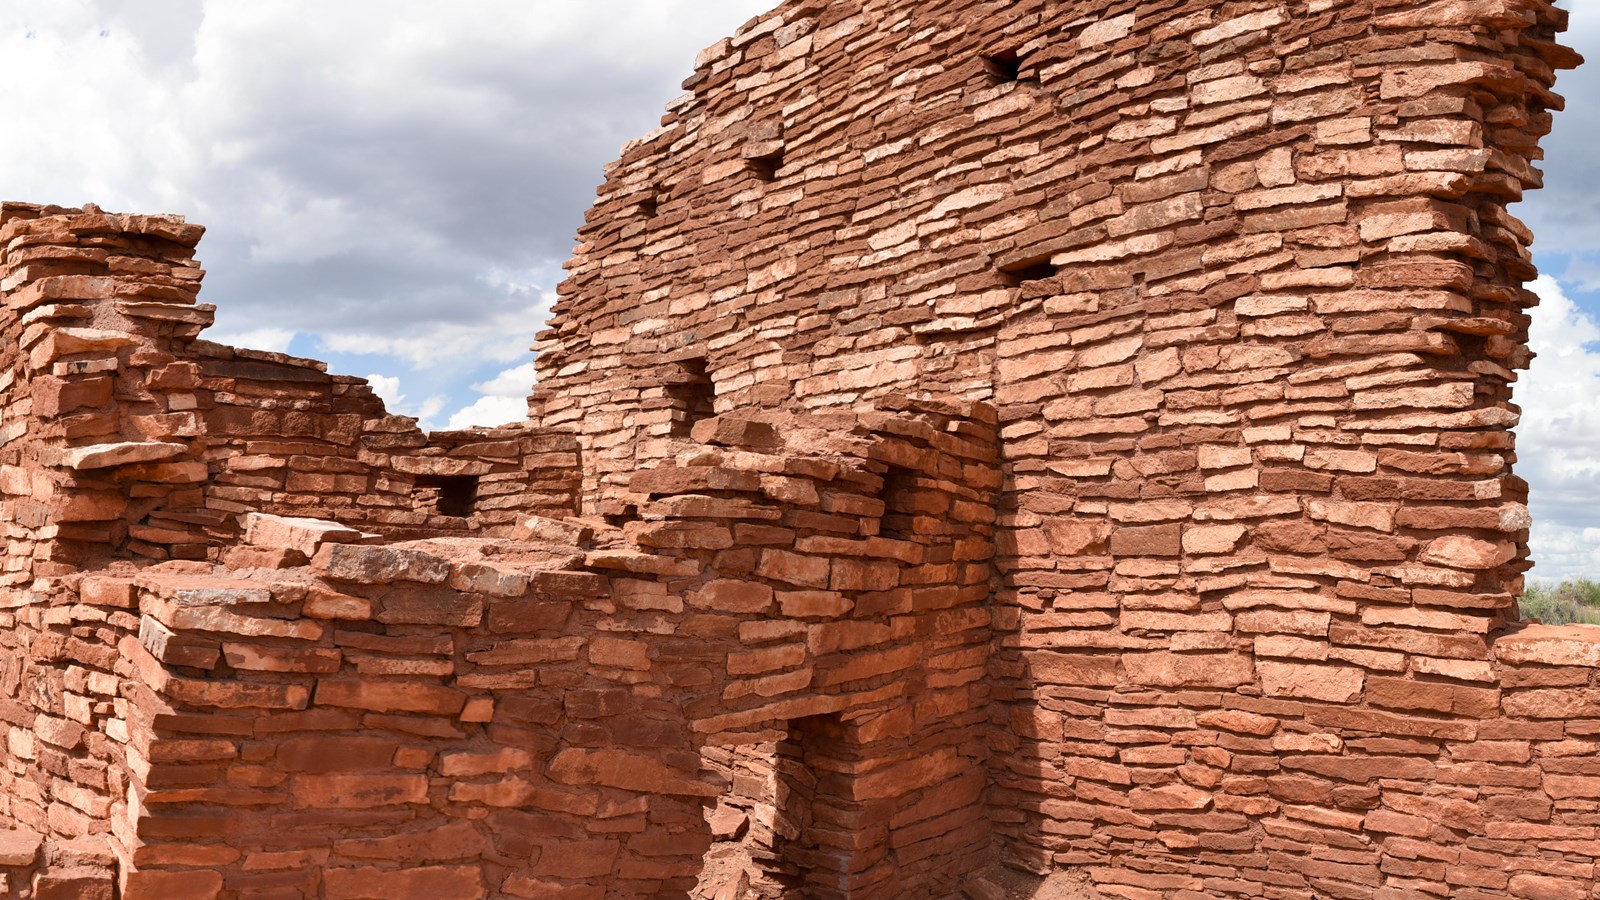 A red sandstone pueblo with a large curving wall